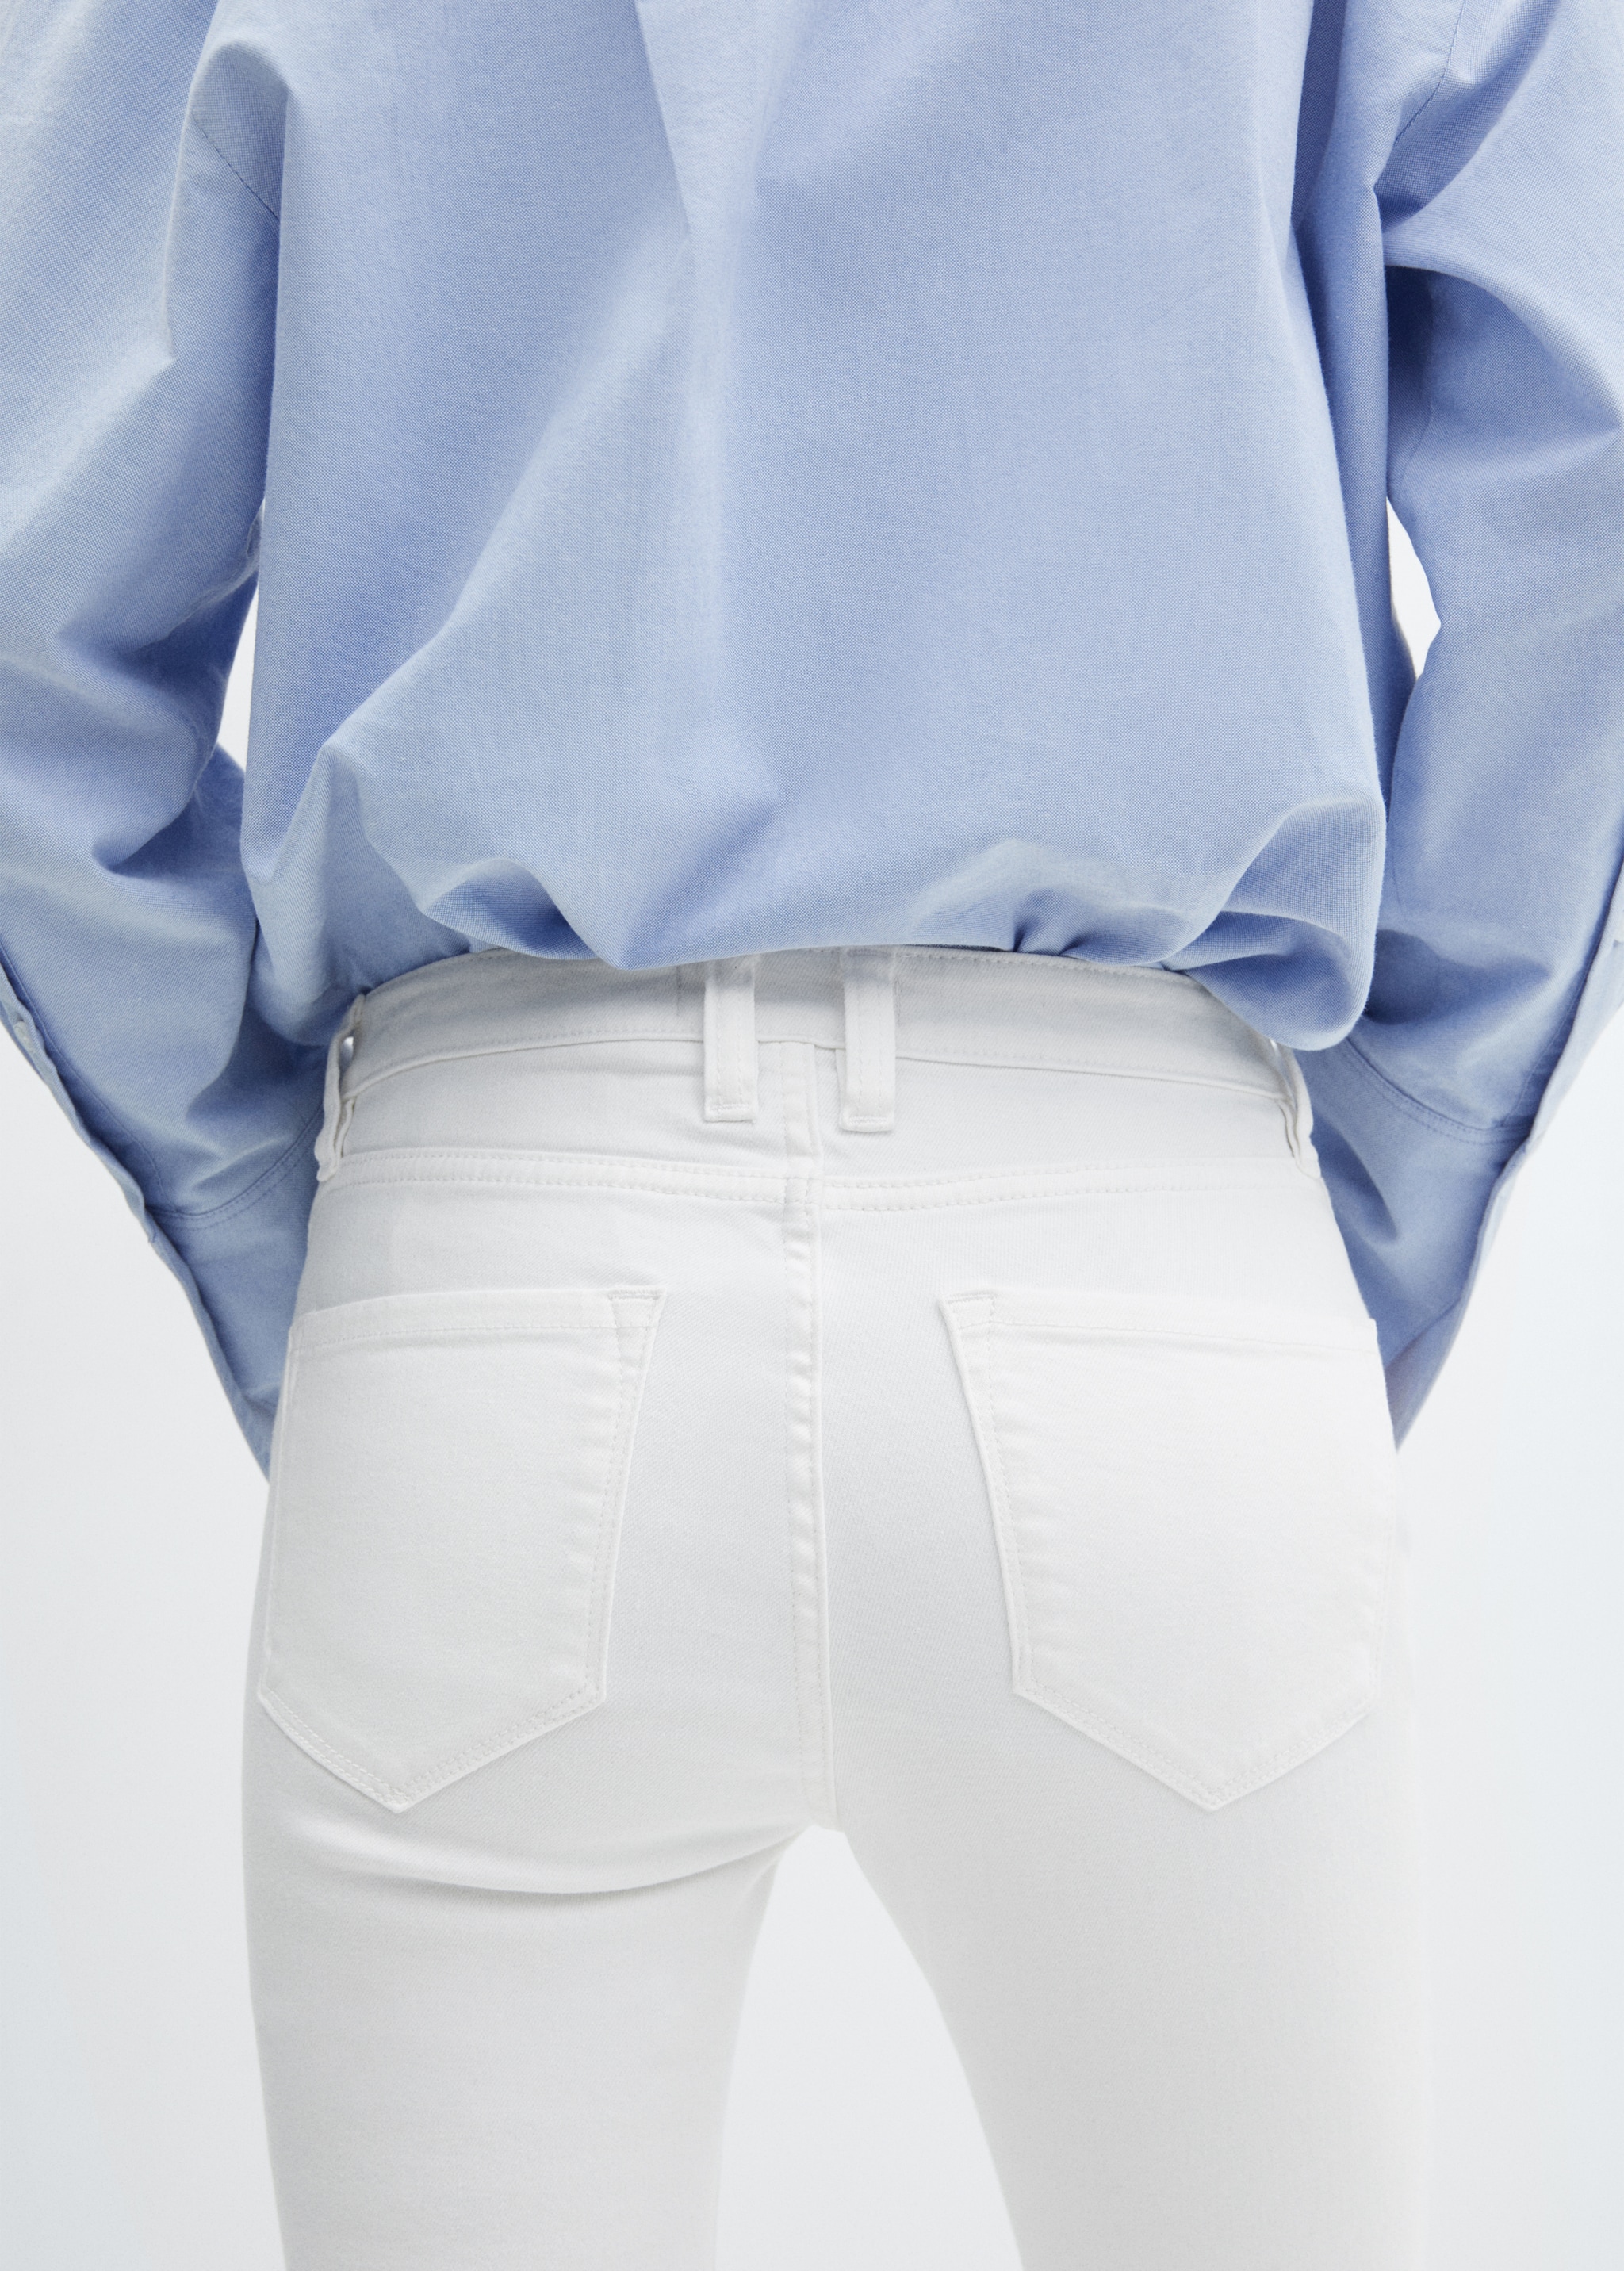 Skinny cropped jeans - Details of the article 4